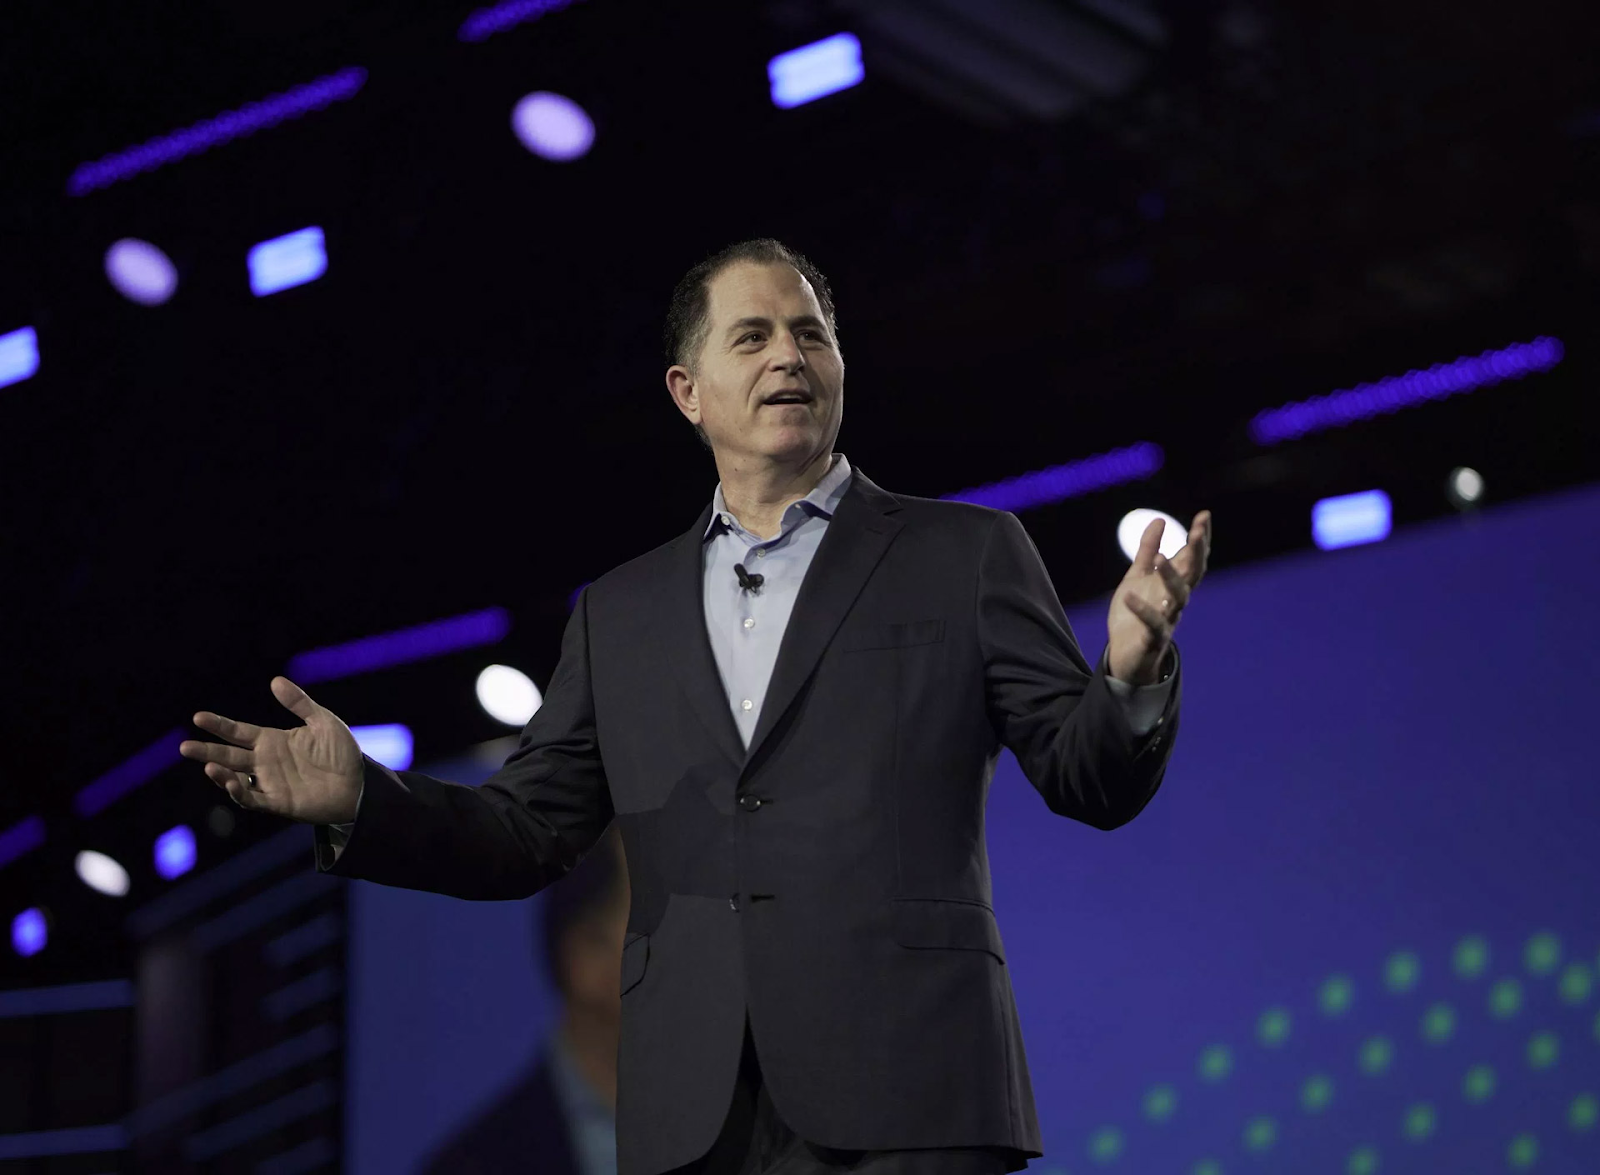 Michael Dell Rumors and Controversies